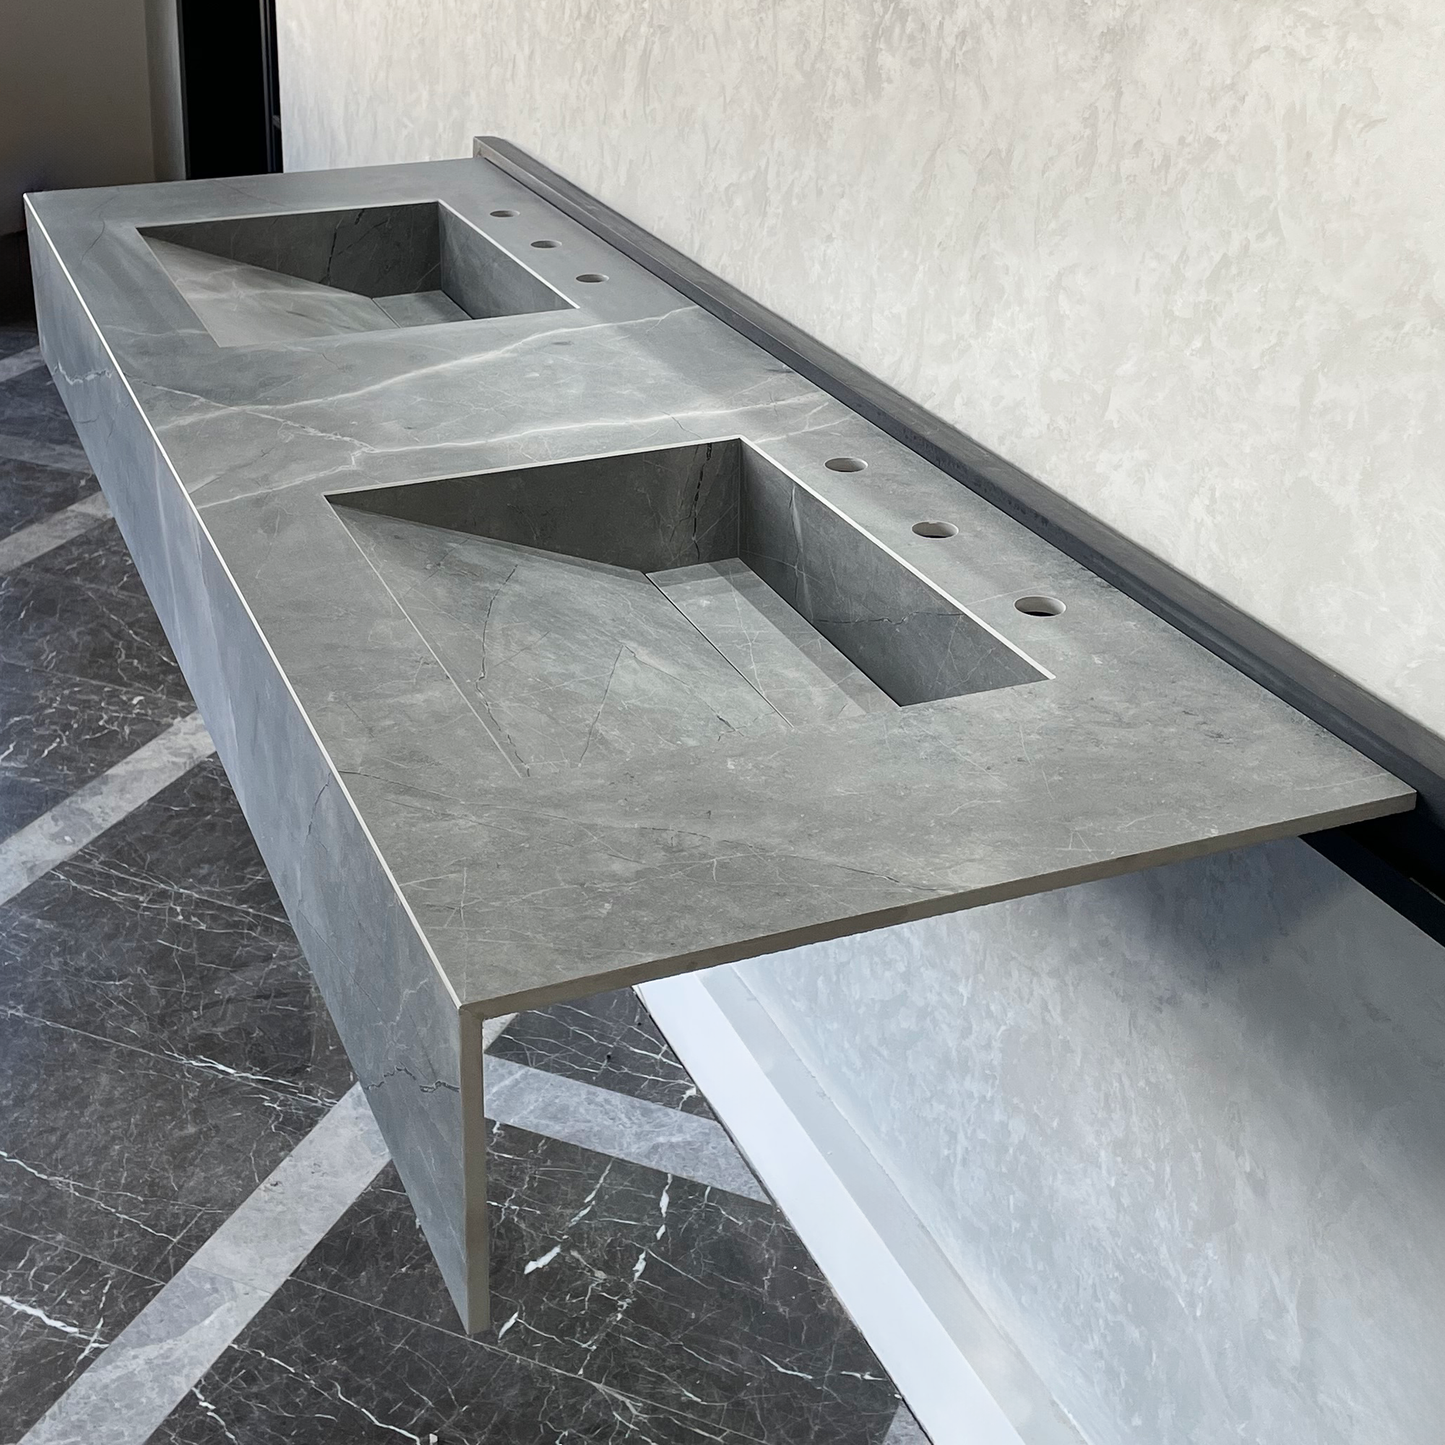 HANDCRAFTED ARMANI GREY HIGH ENGINEERED PORCELAIN DOUBLE SINK